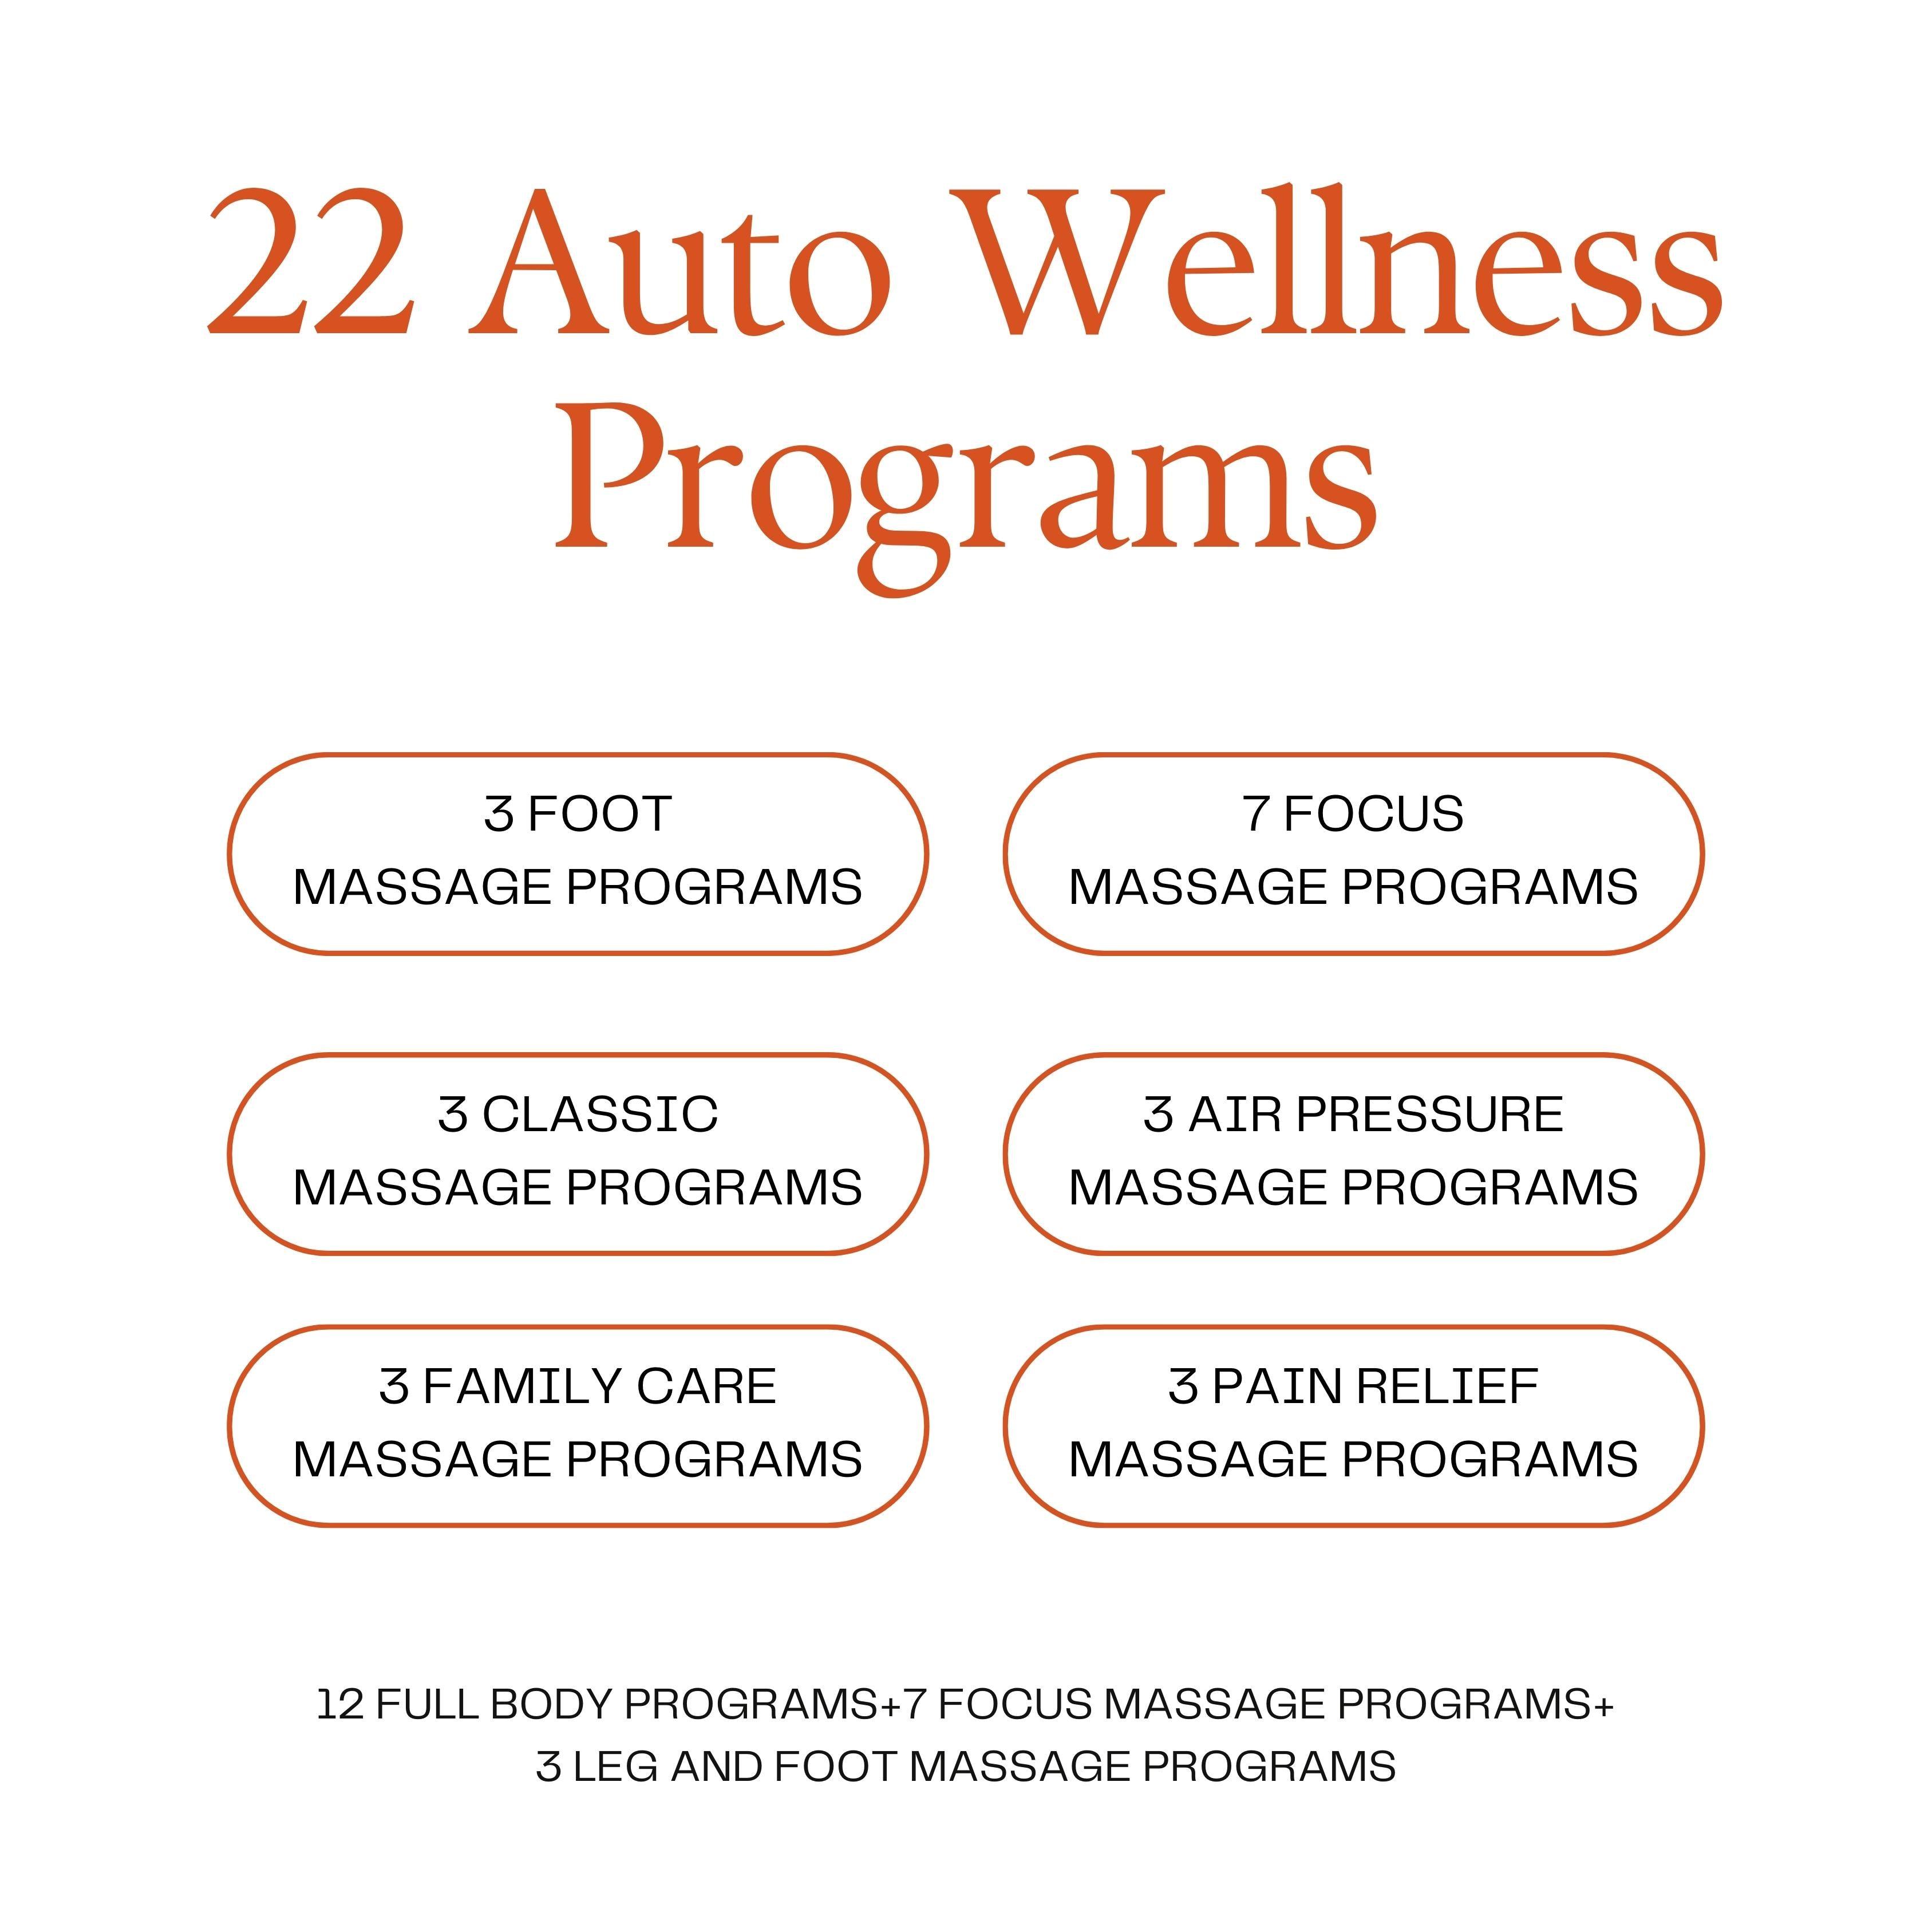 22 auto wellness programs including foot, focus, classic, air pressure, family care, and pain relief massage programs